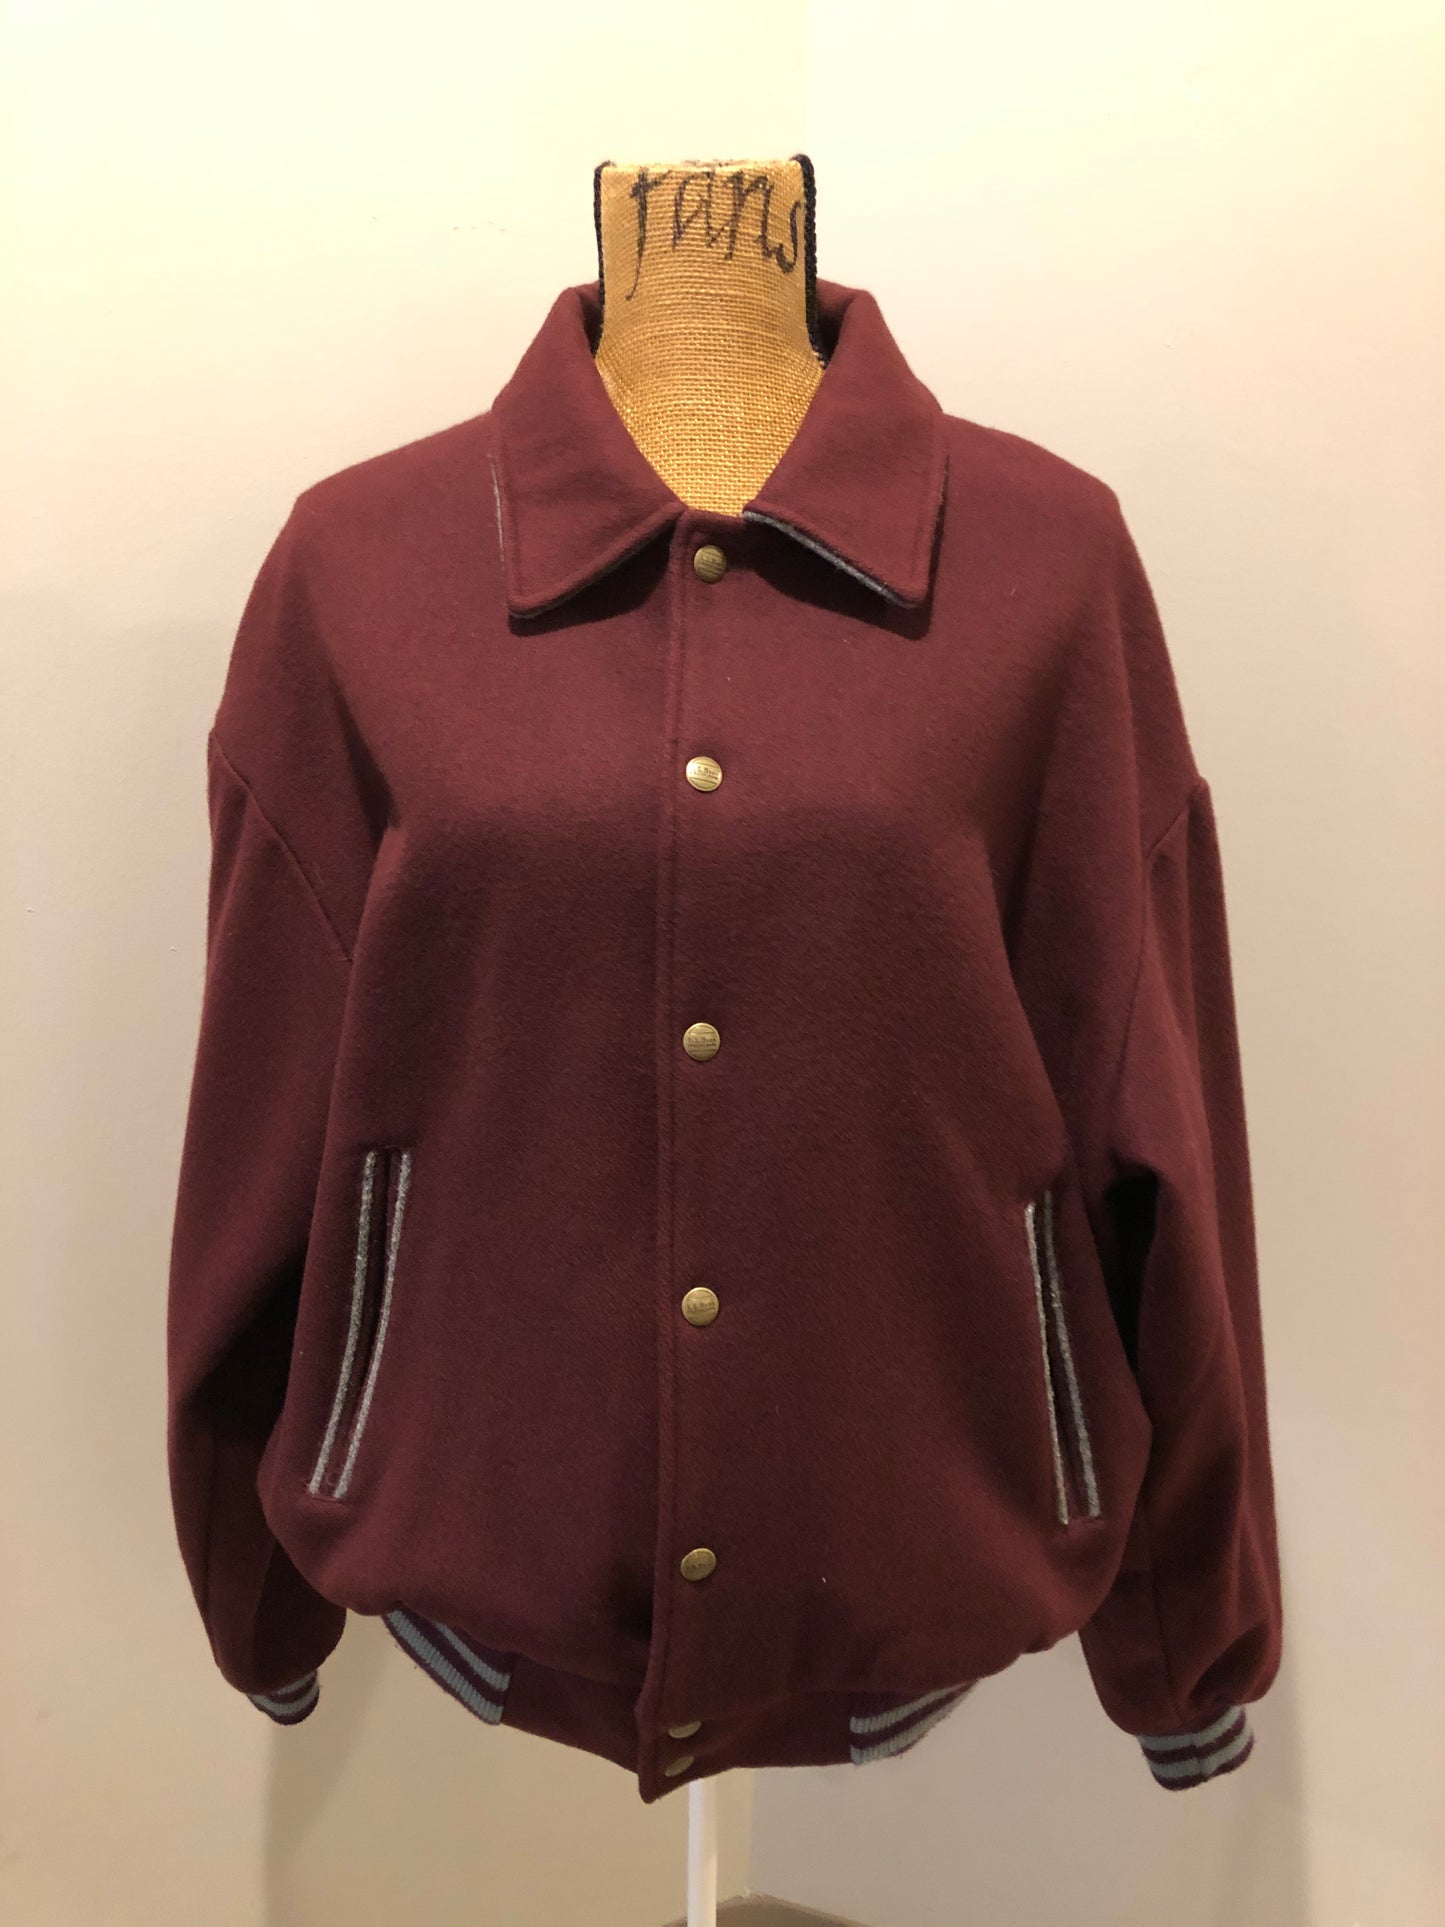 Kingspier Vintage - L.L.Bean bomber jacket in wine with snap closures with logo, knit trim and slash pockets. Size large. 